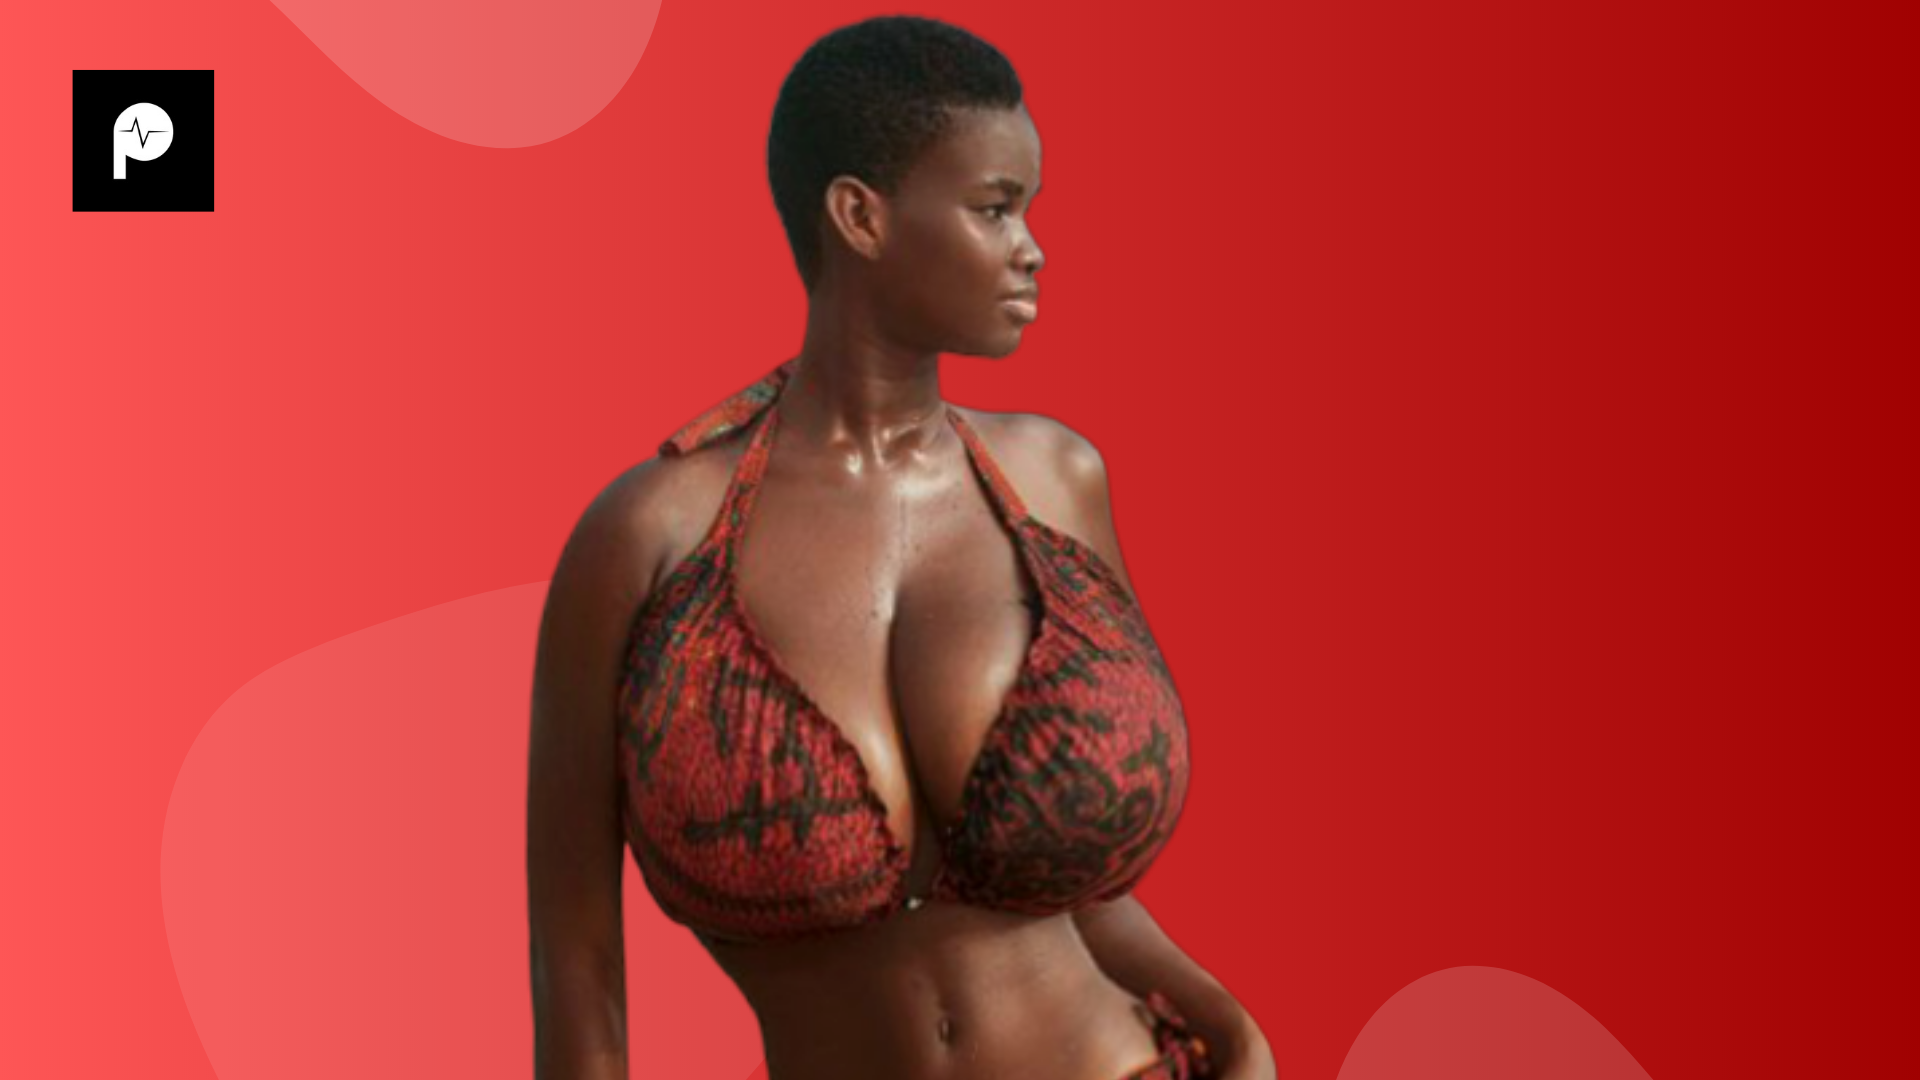 These Two DJs Got Their Breasts Enlarged to Live Like Women For 24